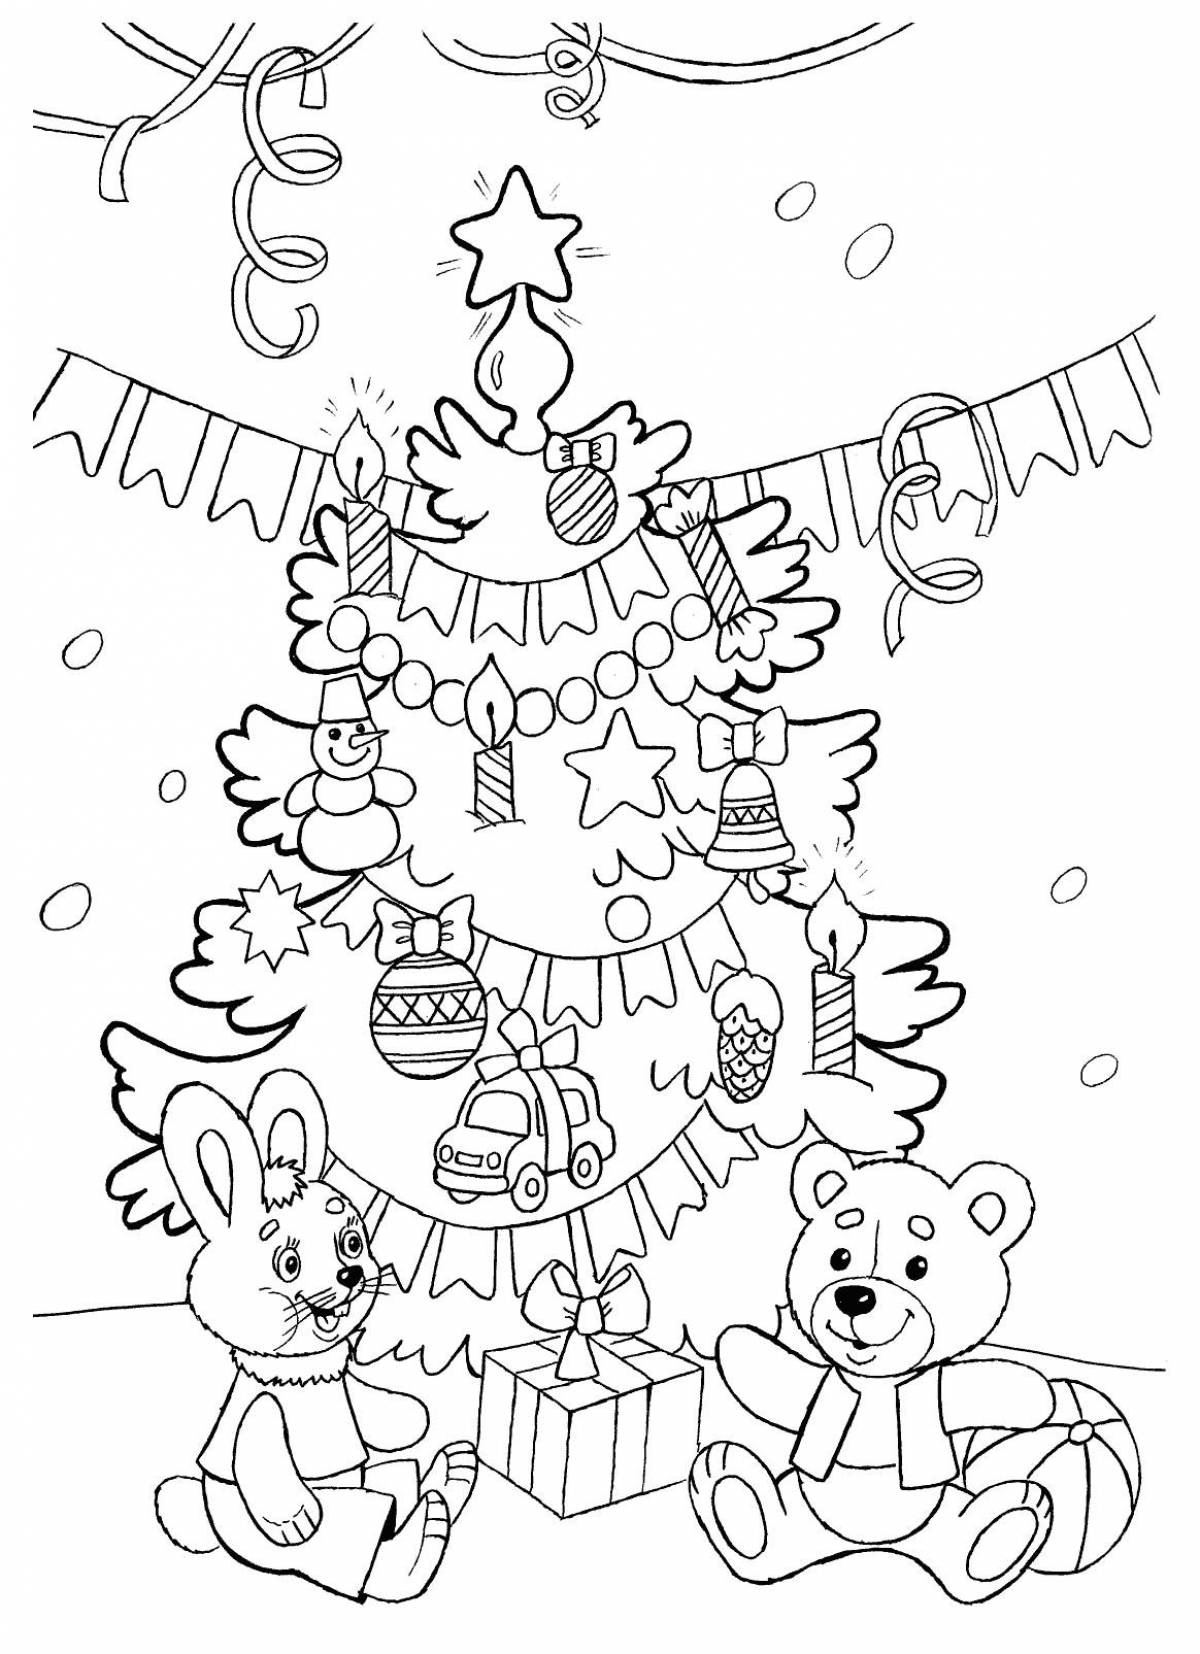 Adorable Christmas tree with toys